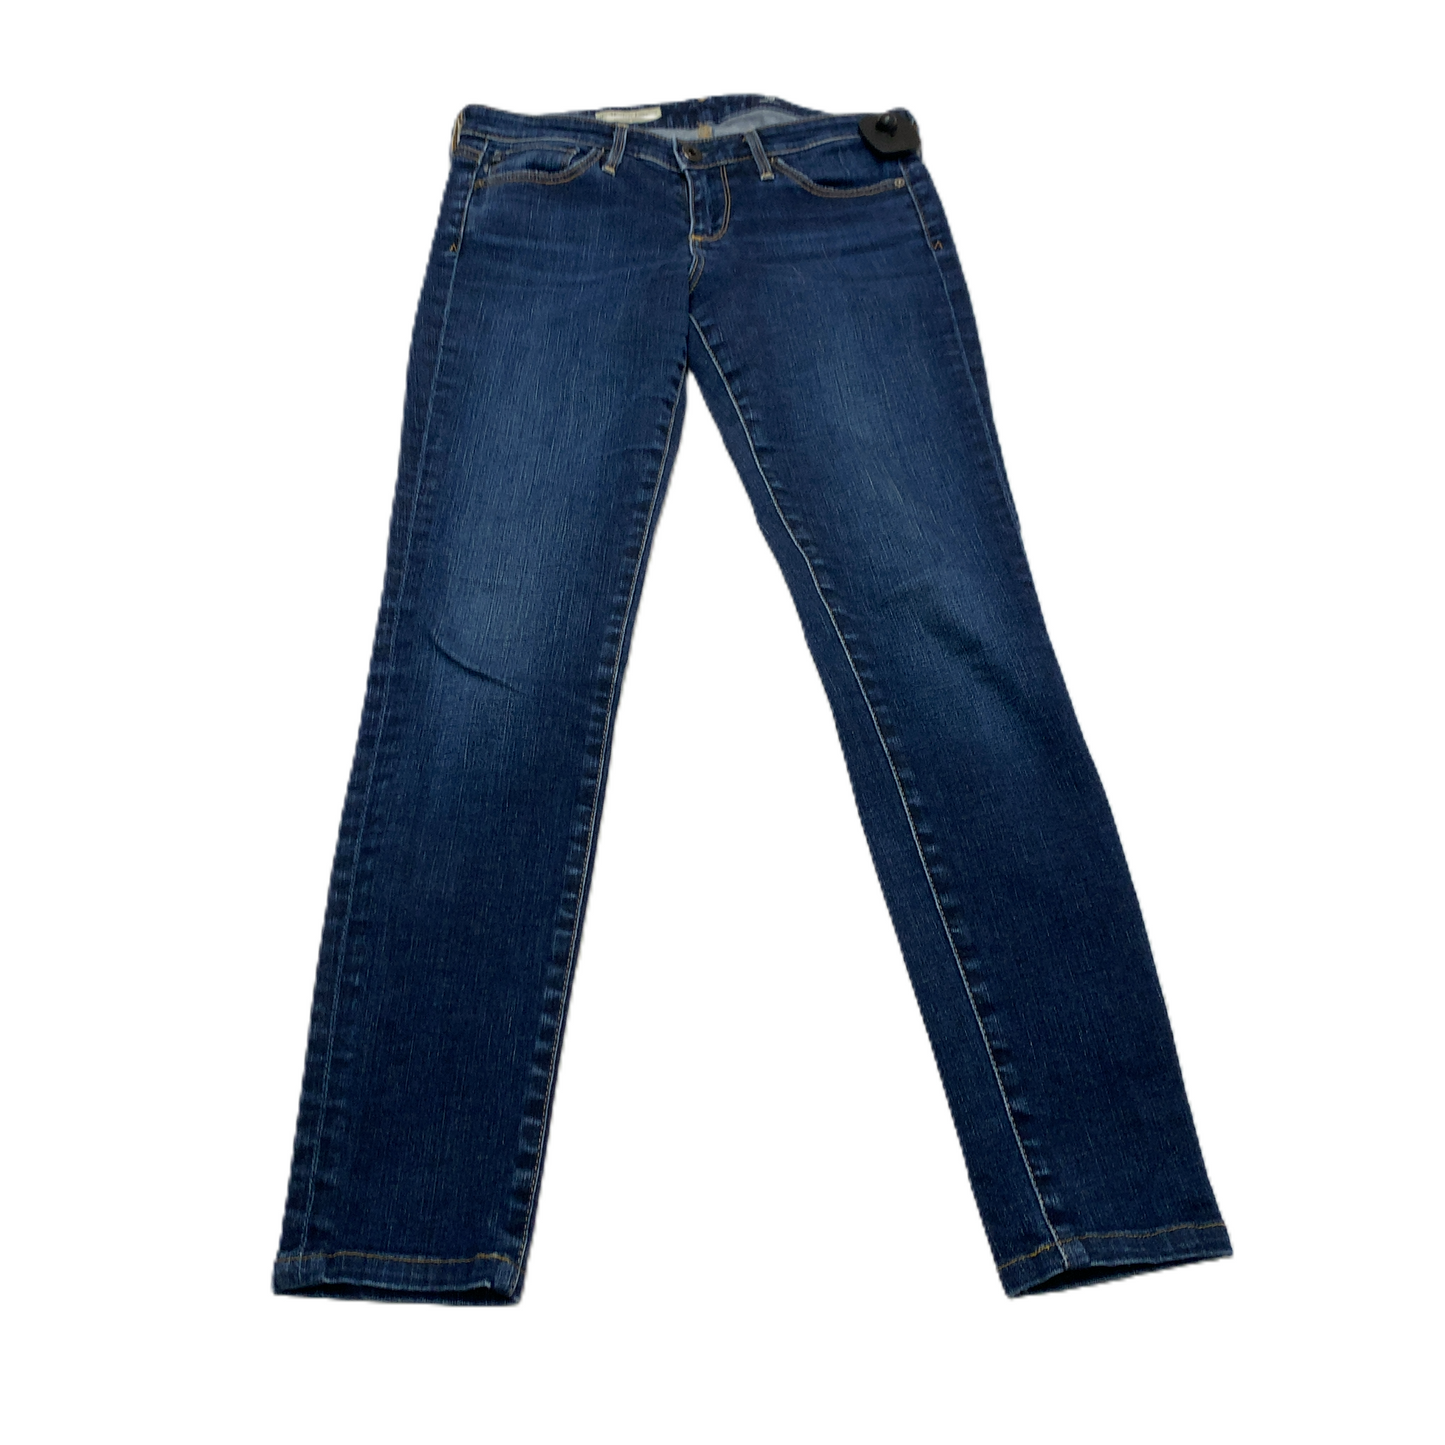 Jeans Designer By Adriano Goldschmied  Size: 2